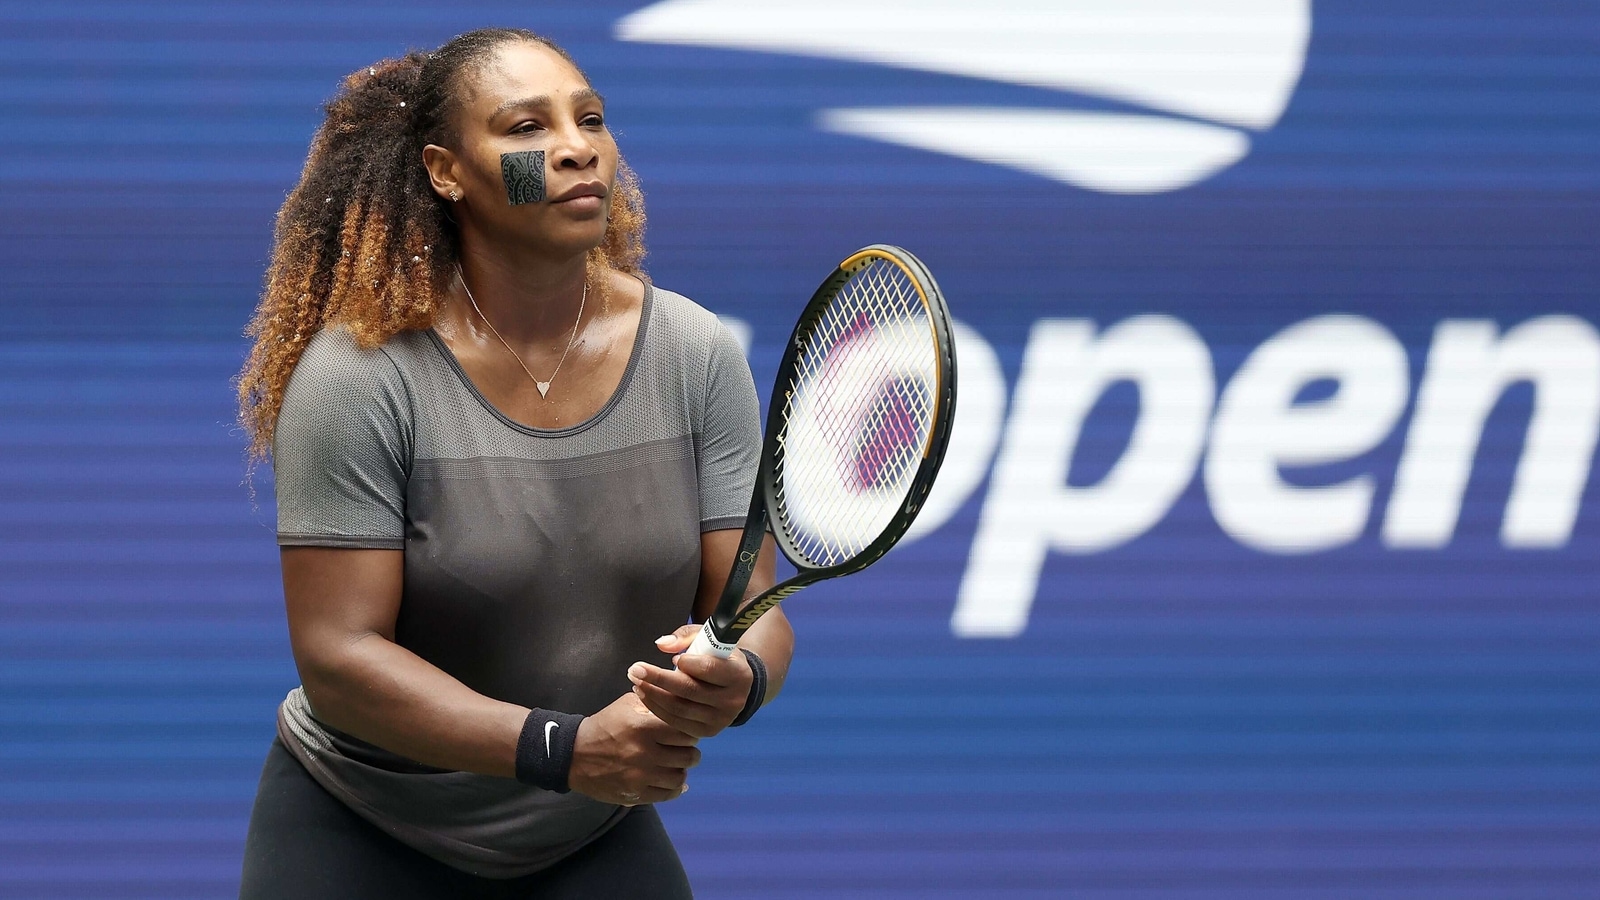 Serena Williams’ US Open run inspiring people of all ages